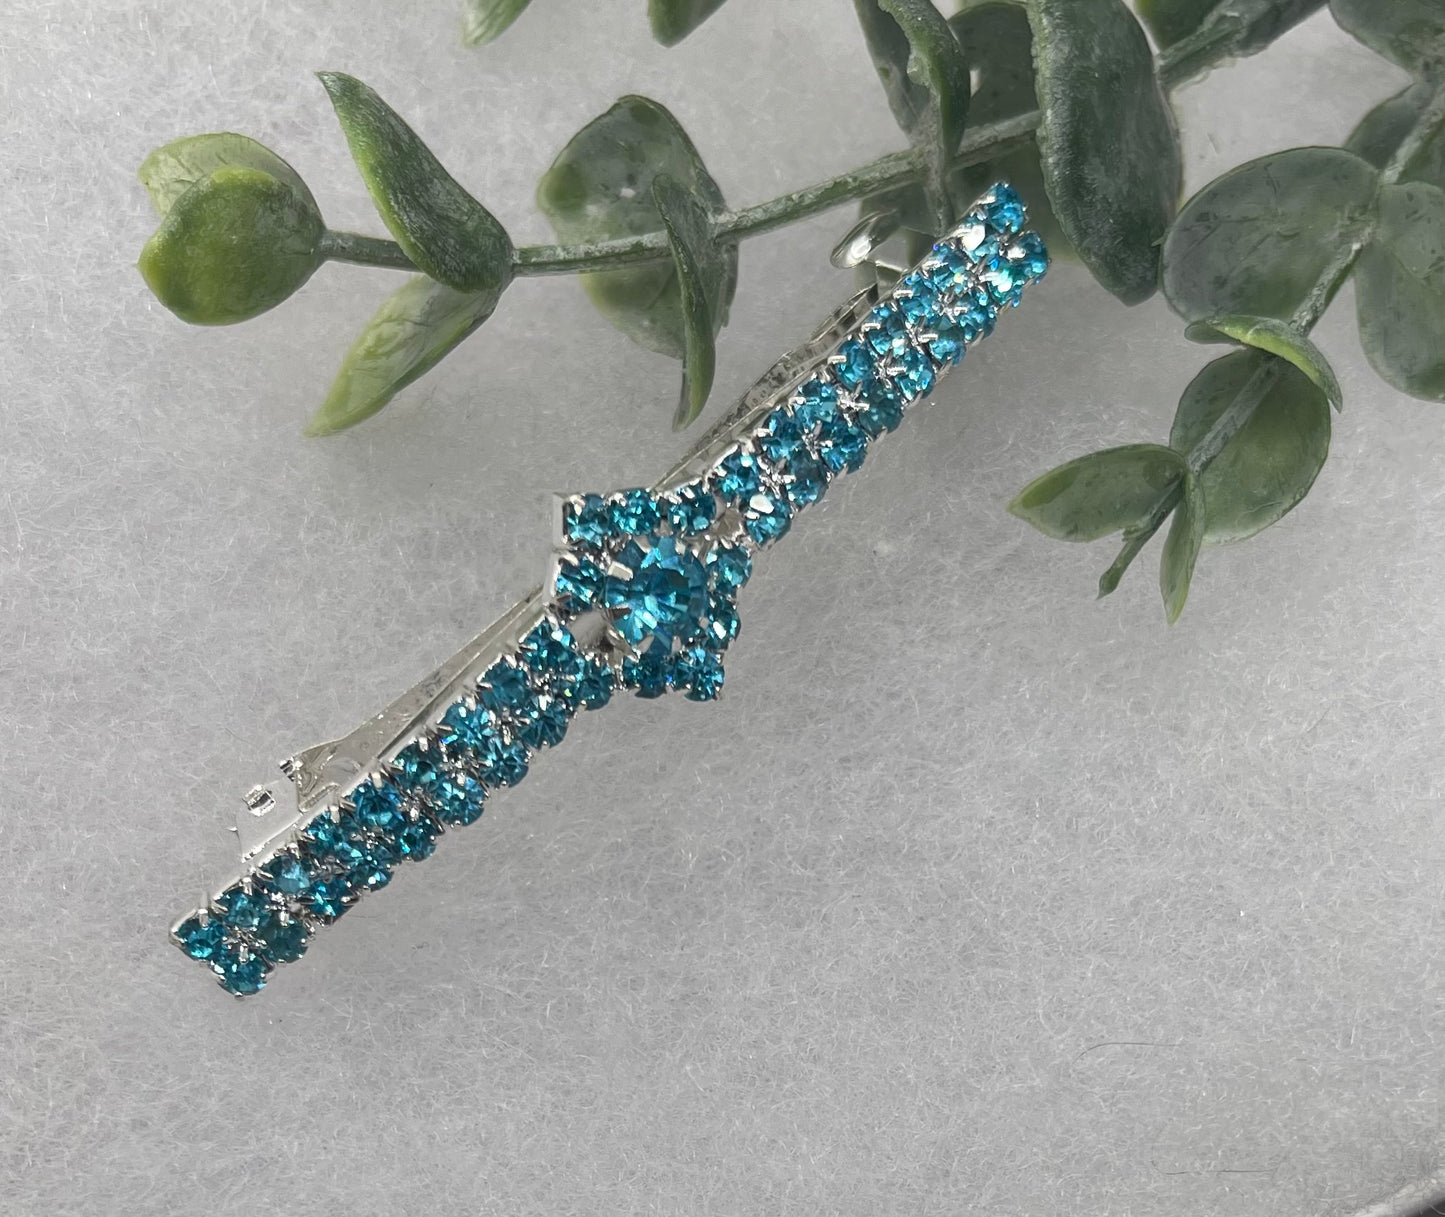 Teal Crystal Rhinestone Barrette approximately 3.0”Metal silver tone formal hair accessory gift wedding bridal shower accessories